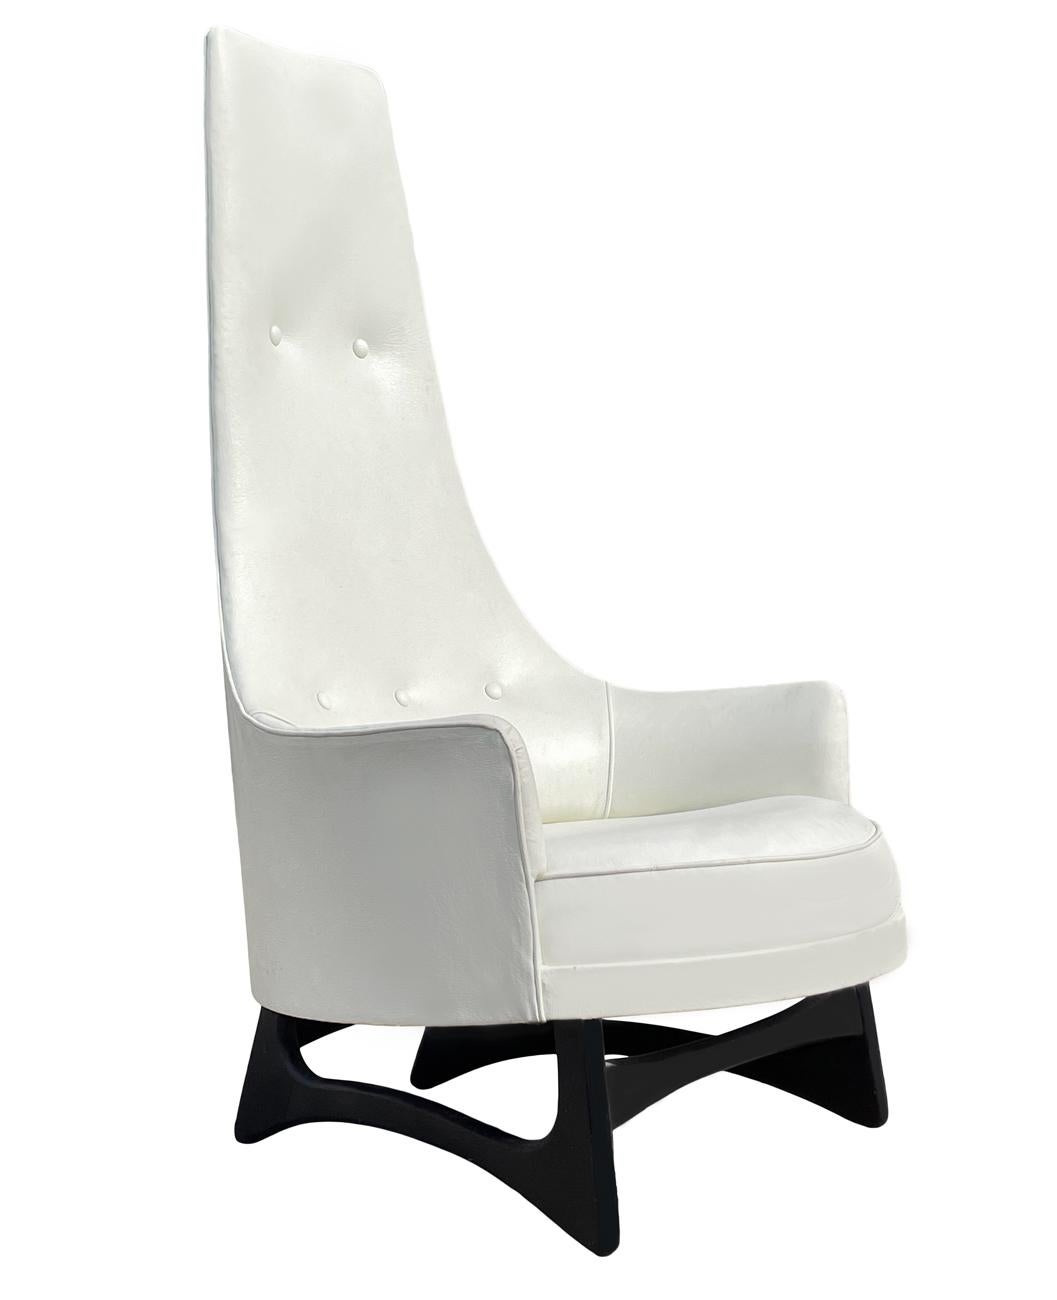 A tall sculptural lounge chair designed by Adrian Pearsall in the 1960's. It features the original white naugahyde fabric with ebony legs.